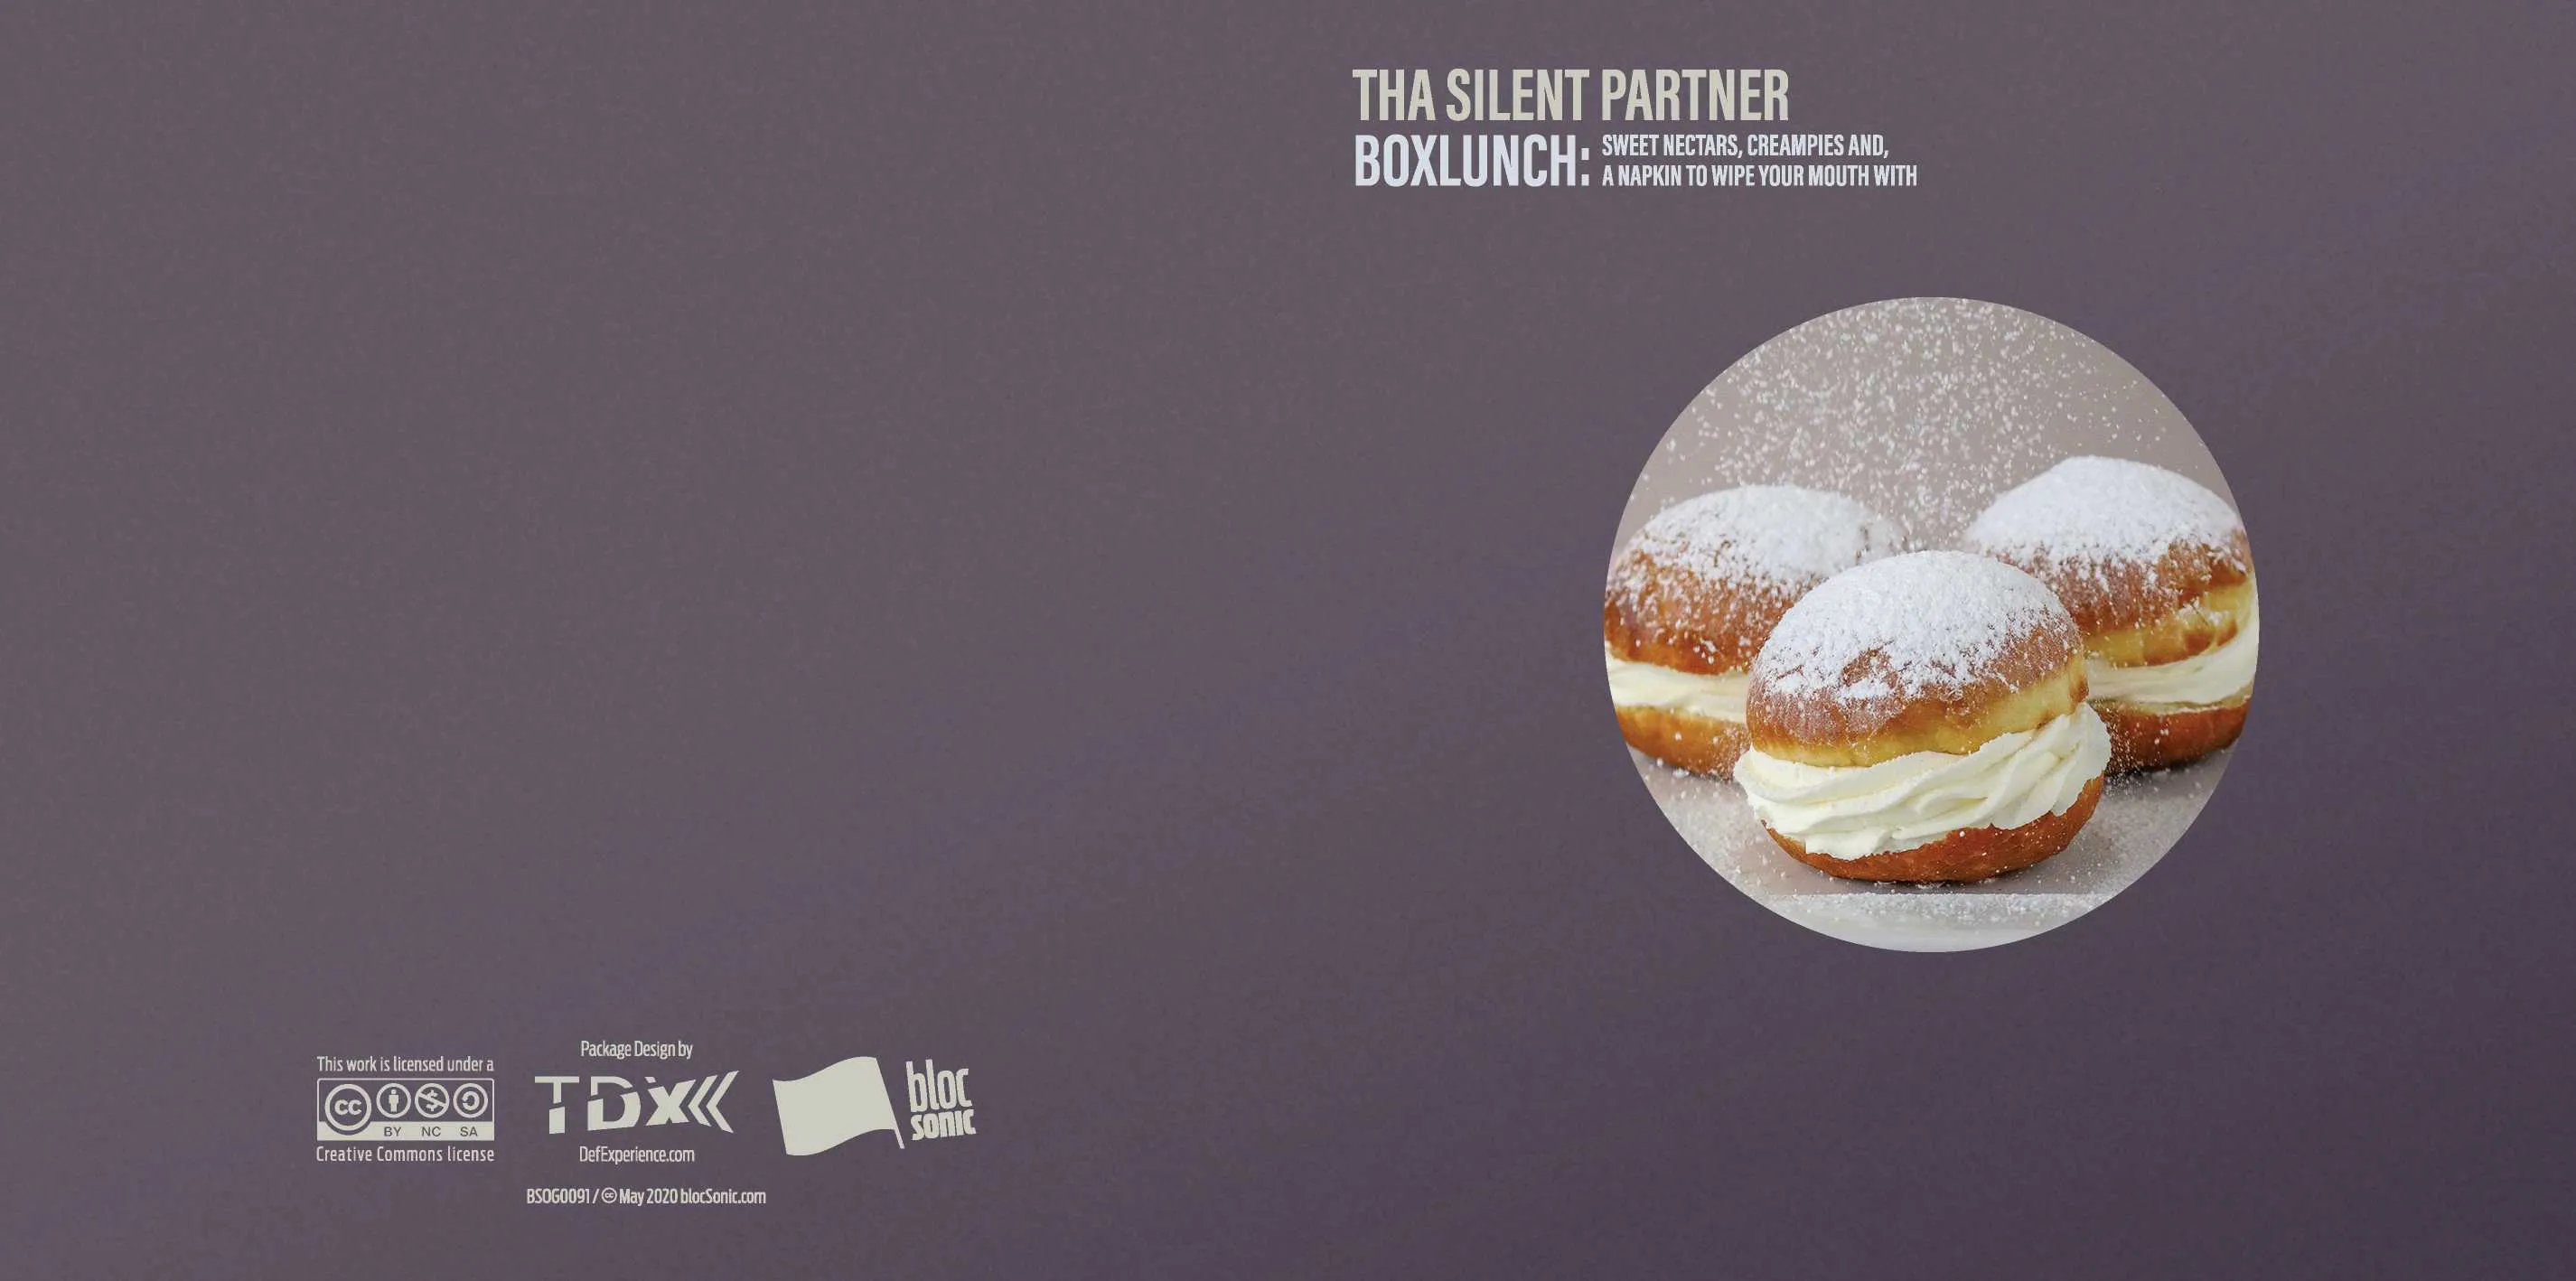 Album insert for “BOXLUNCH: Sweet Nectars, Creampies And, A Napkin To Wipe Your Mouth With” by Tha Silent Partner